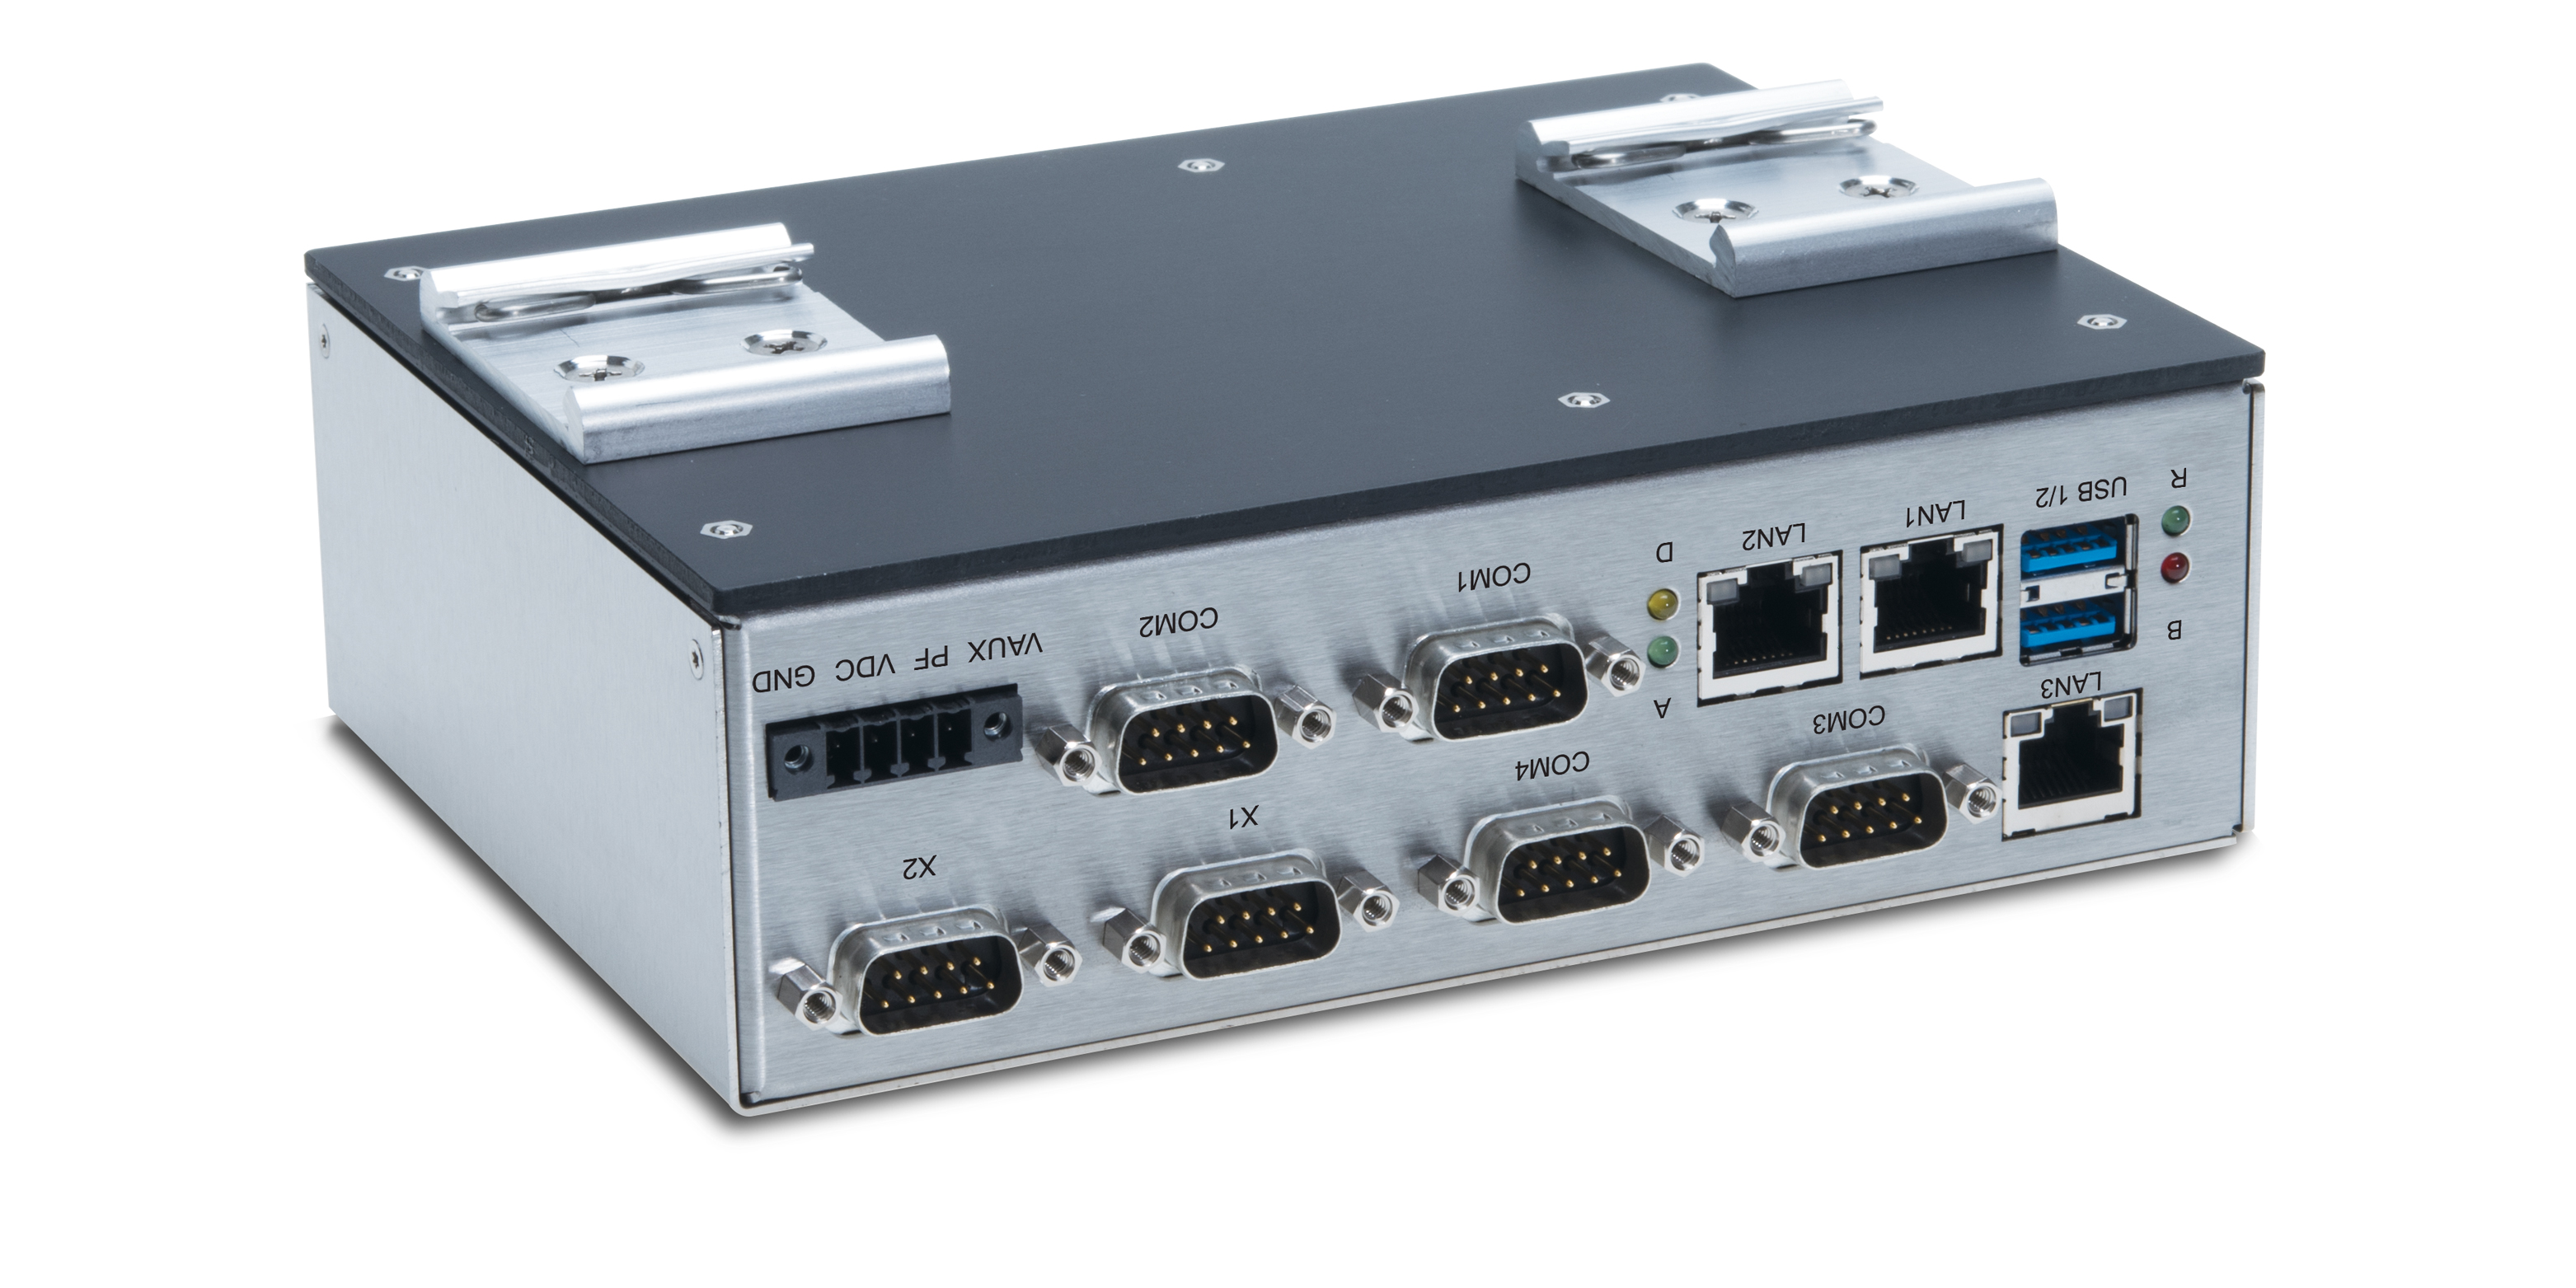 M - Embedded PC COMPACT8 - Syslogic